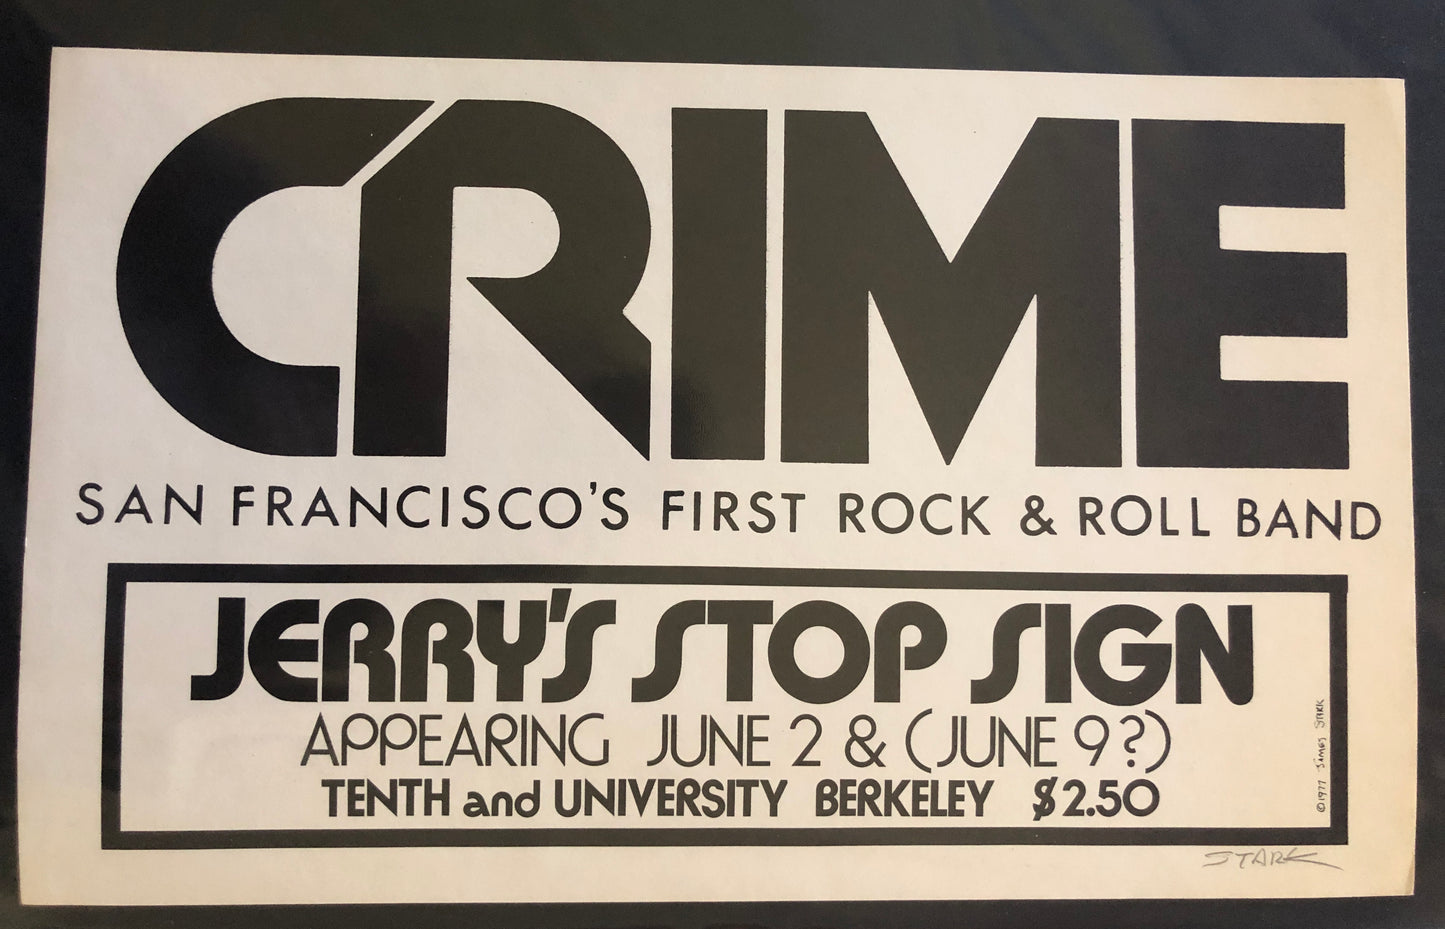 James Stark "Crime, Jerry's Stop Sign 1977" Poster